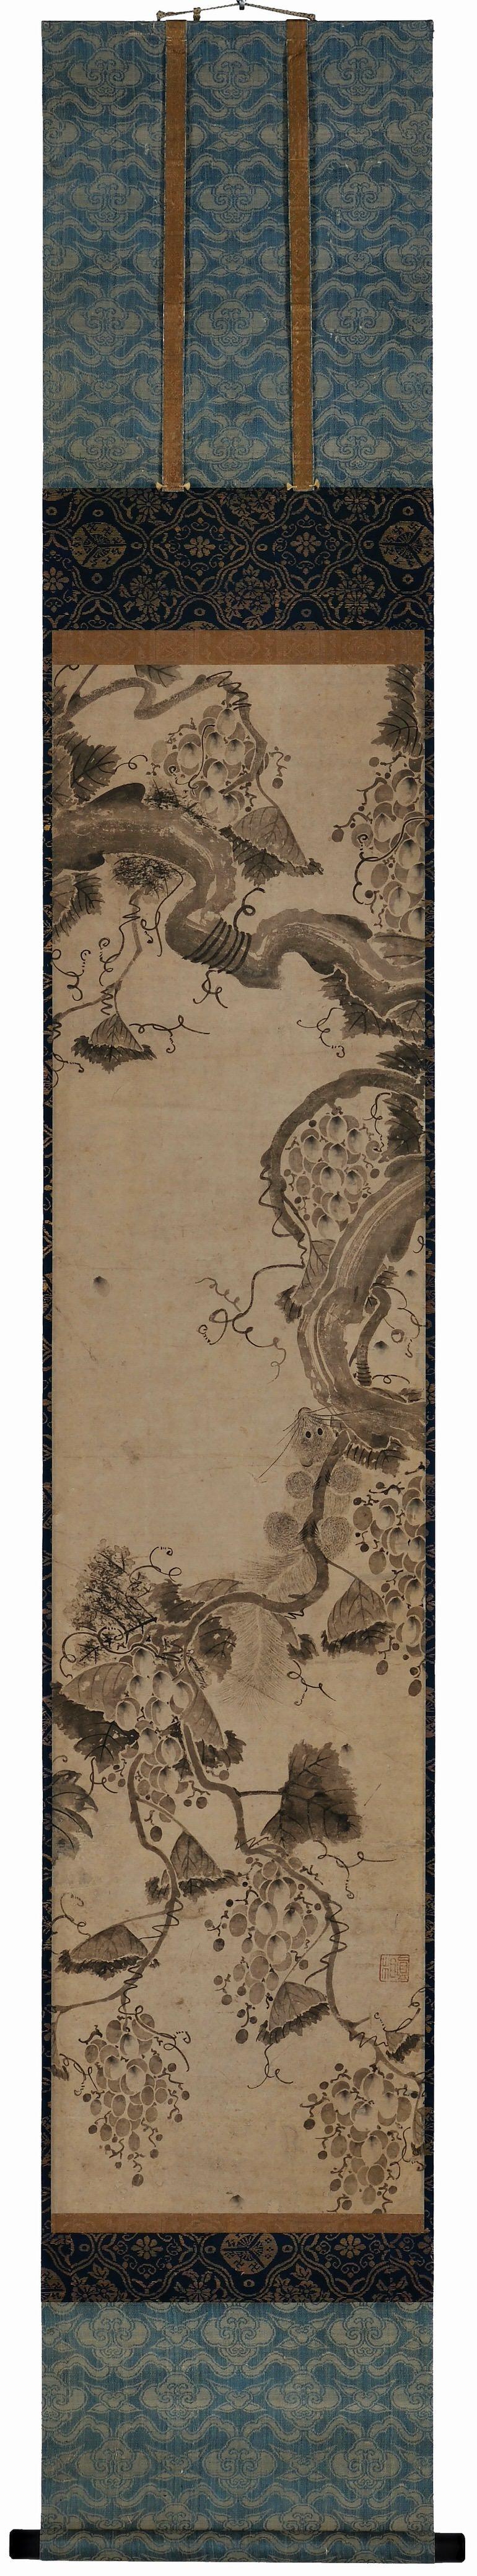 Anonymous. Korean, 17th century. Joseon period.

Hanging scroll. Ink on paper.

Seal: Shinso

Dimensions:

Scroll: H. 200 cm x W. 31 cm (79” x 12”)
Image: H. 122 cm x W. 29.5 cm (48” x 11.5”)

The grapevine came to China and then Korea